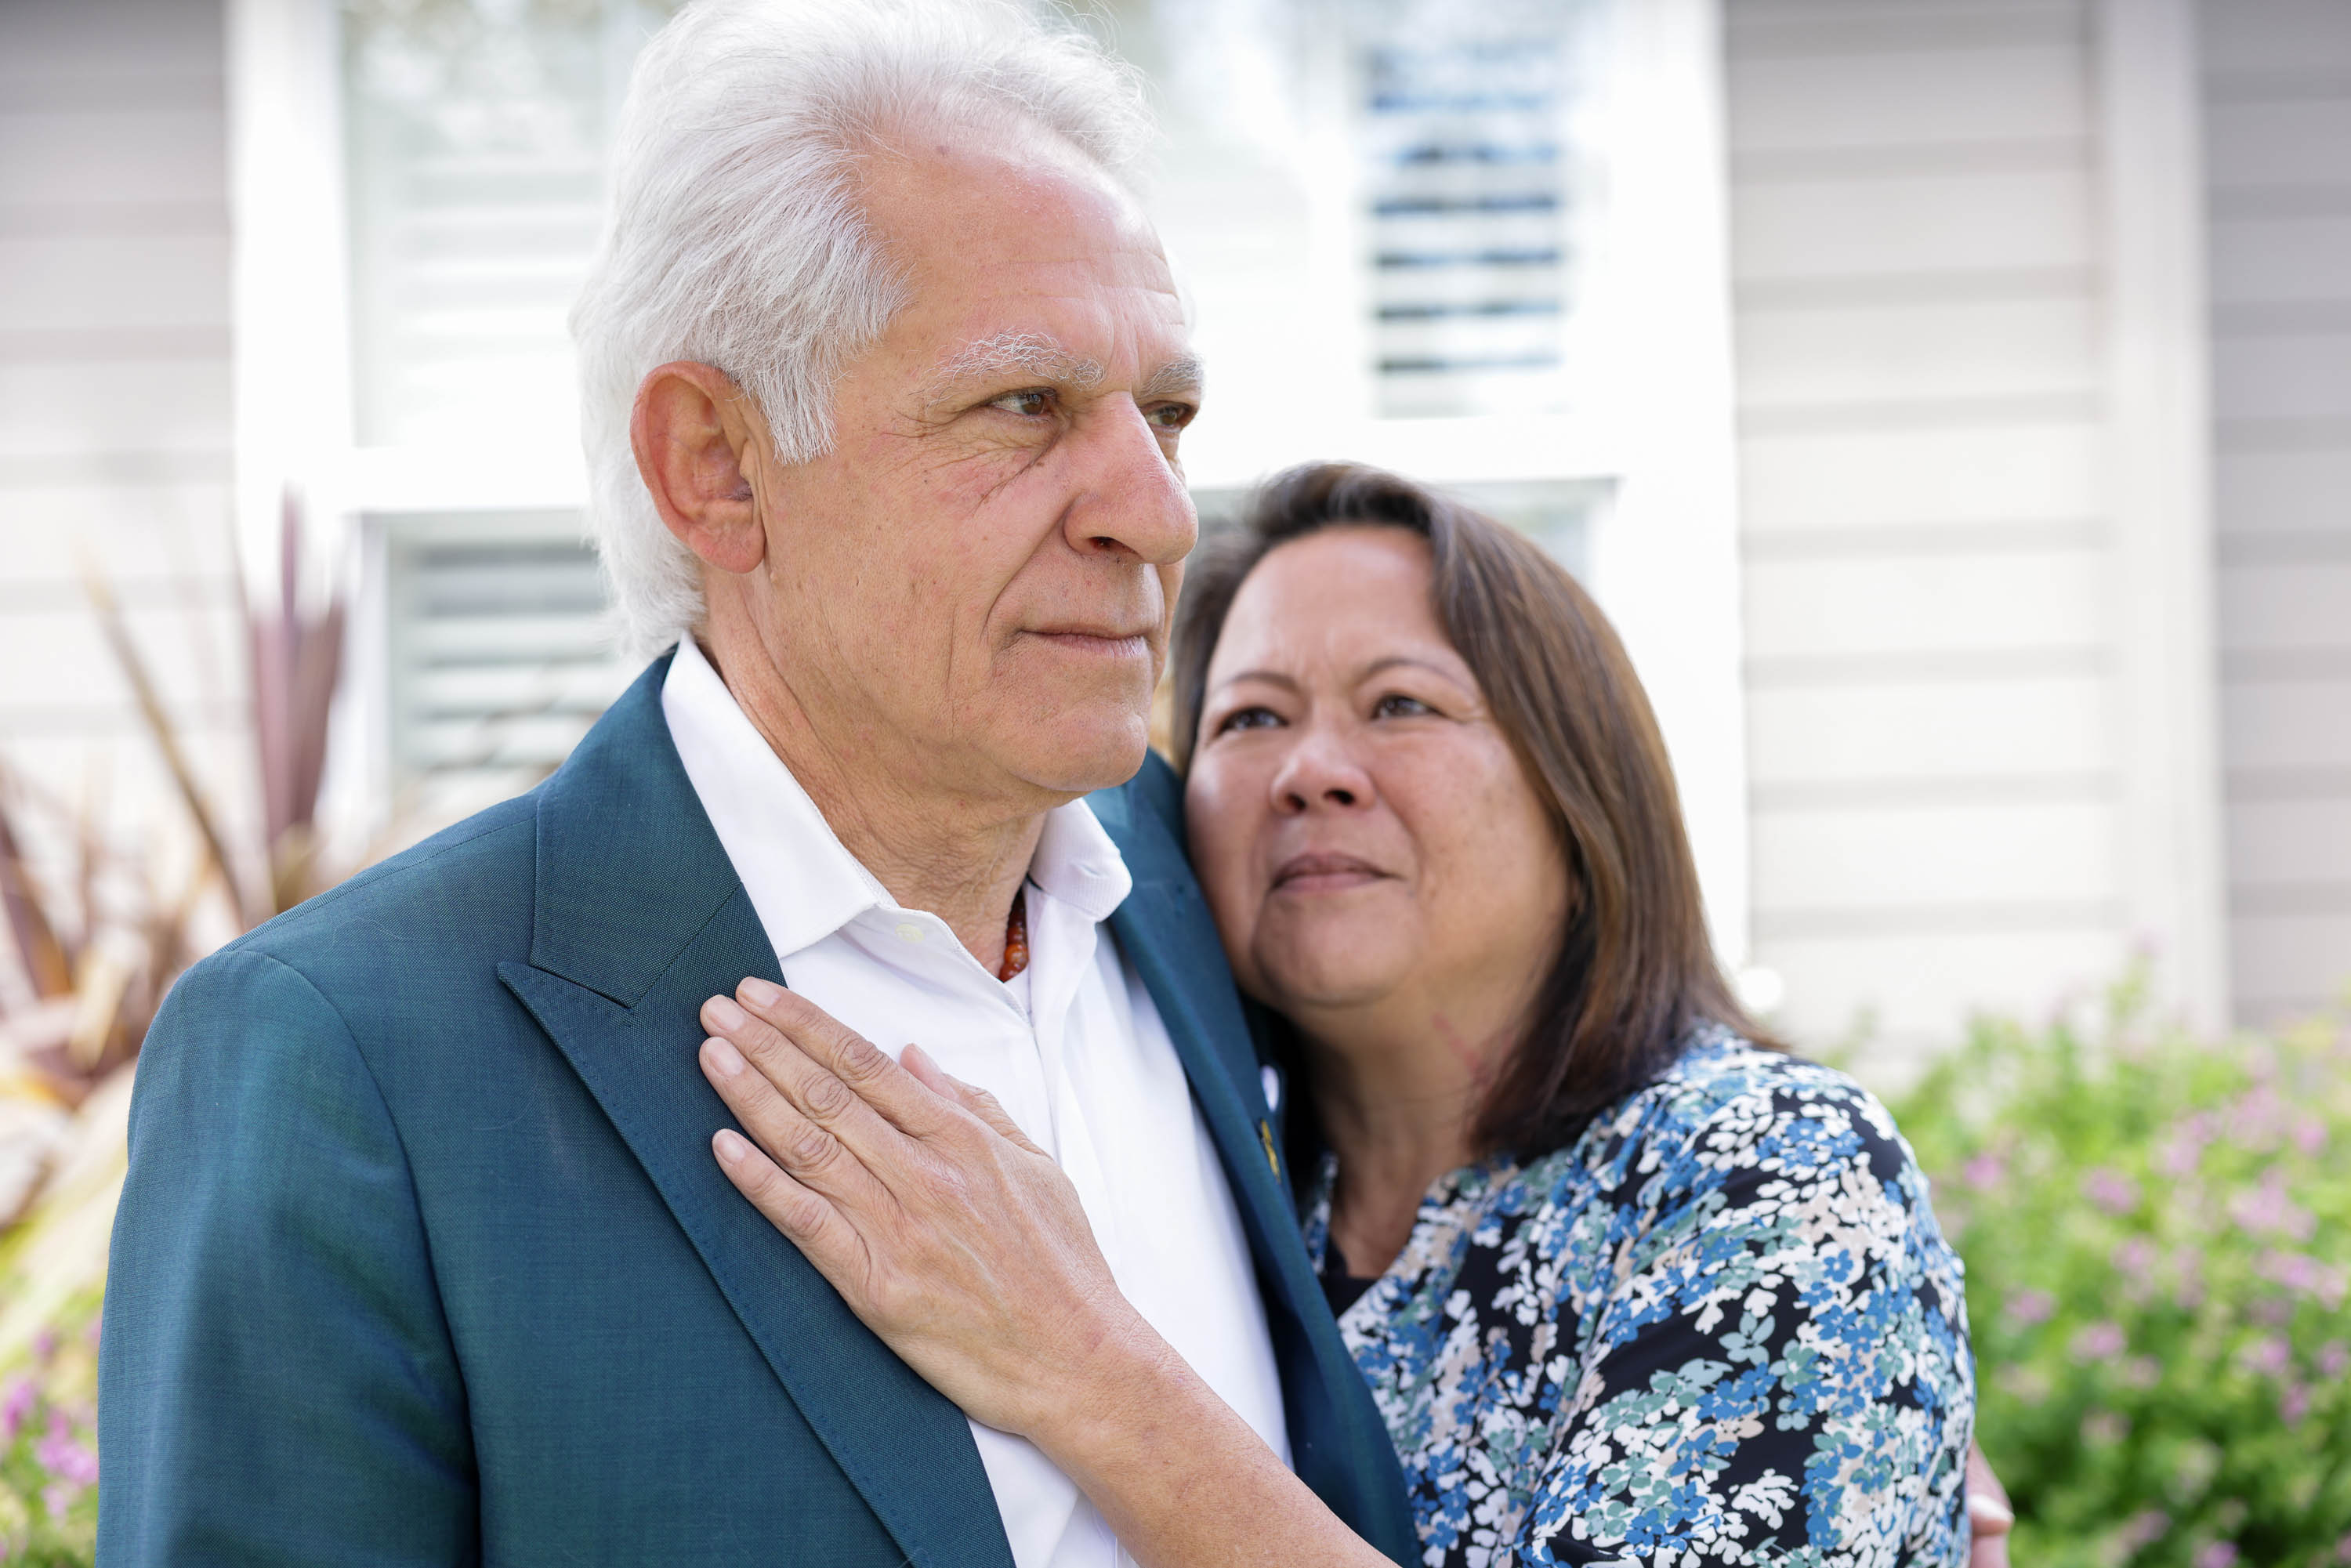 An older couple stands close, the woman embracing the man from behind, both looking thoughtful, in daylight. 